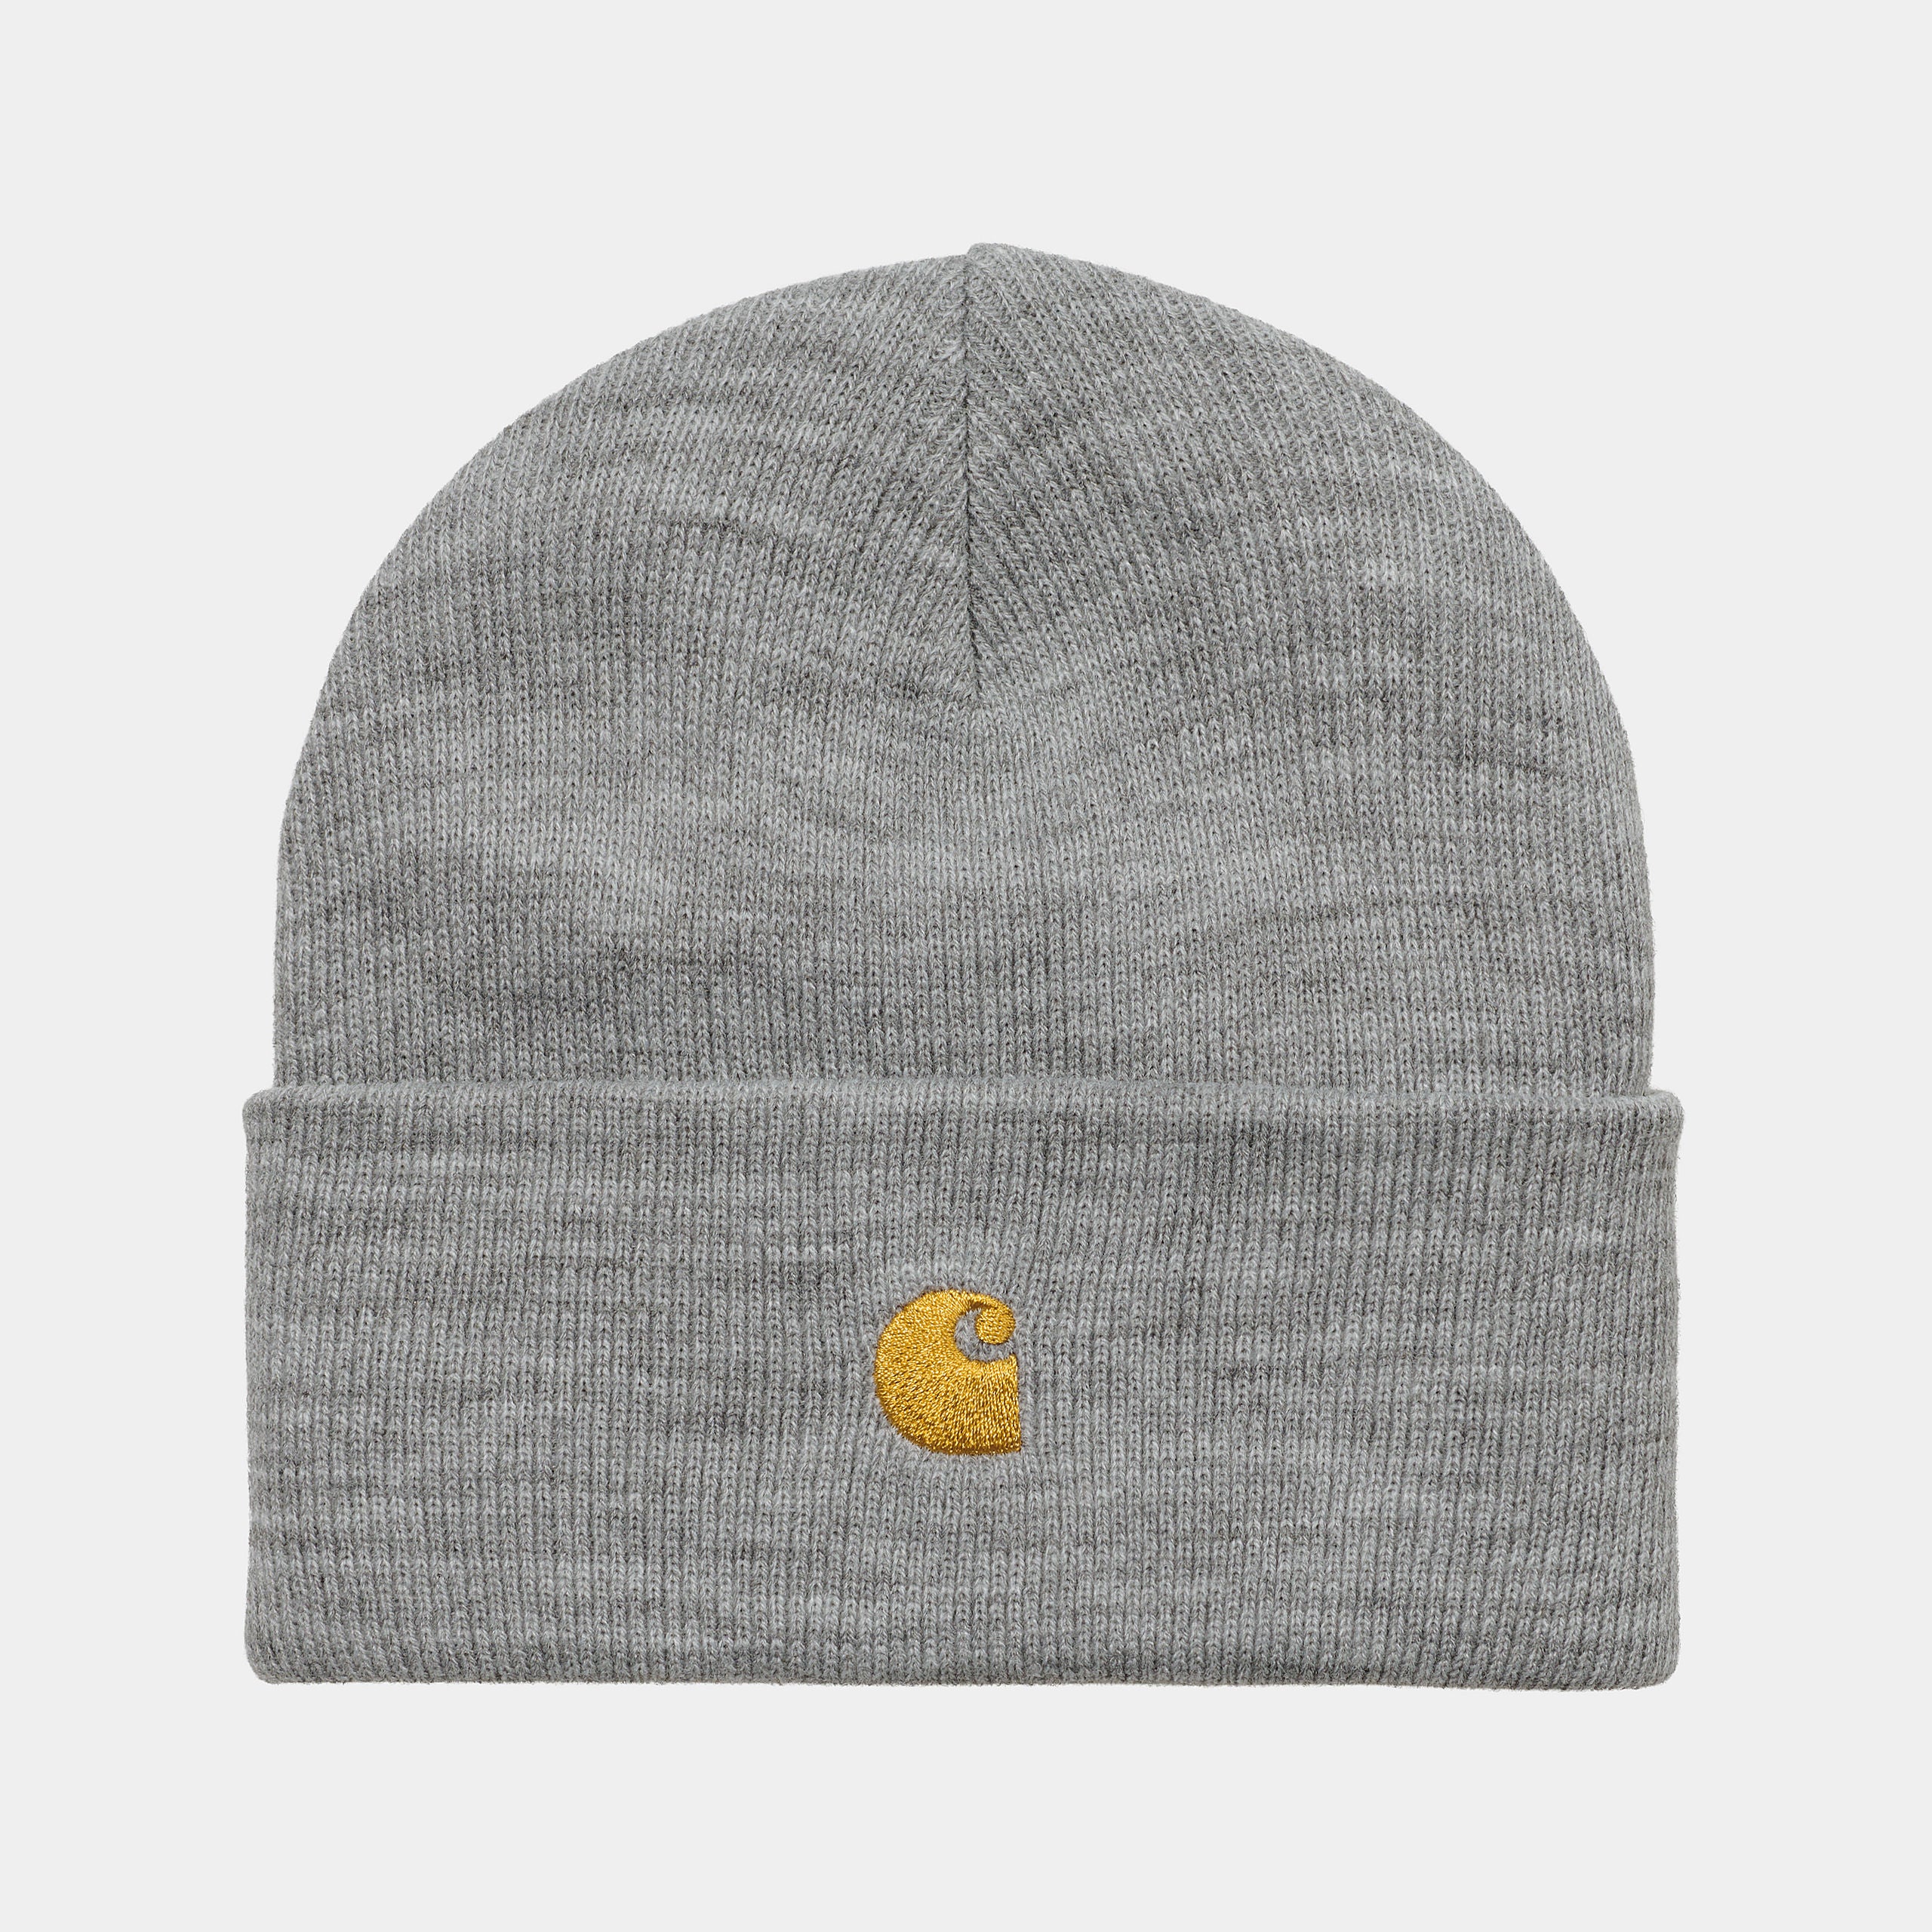 Chase Beanie-Grey Heather / Gold-Front